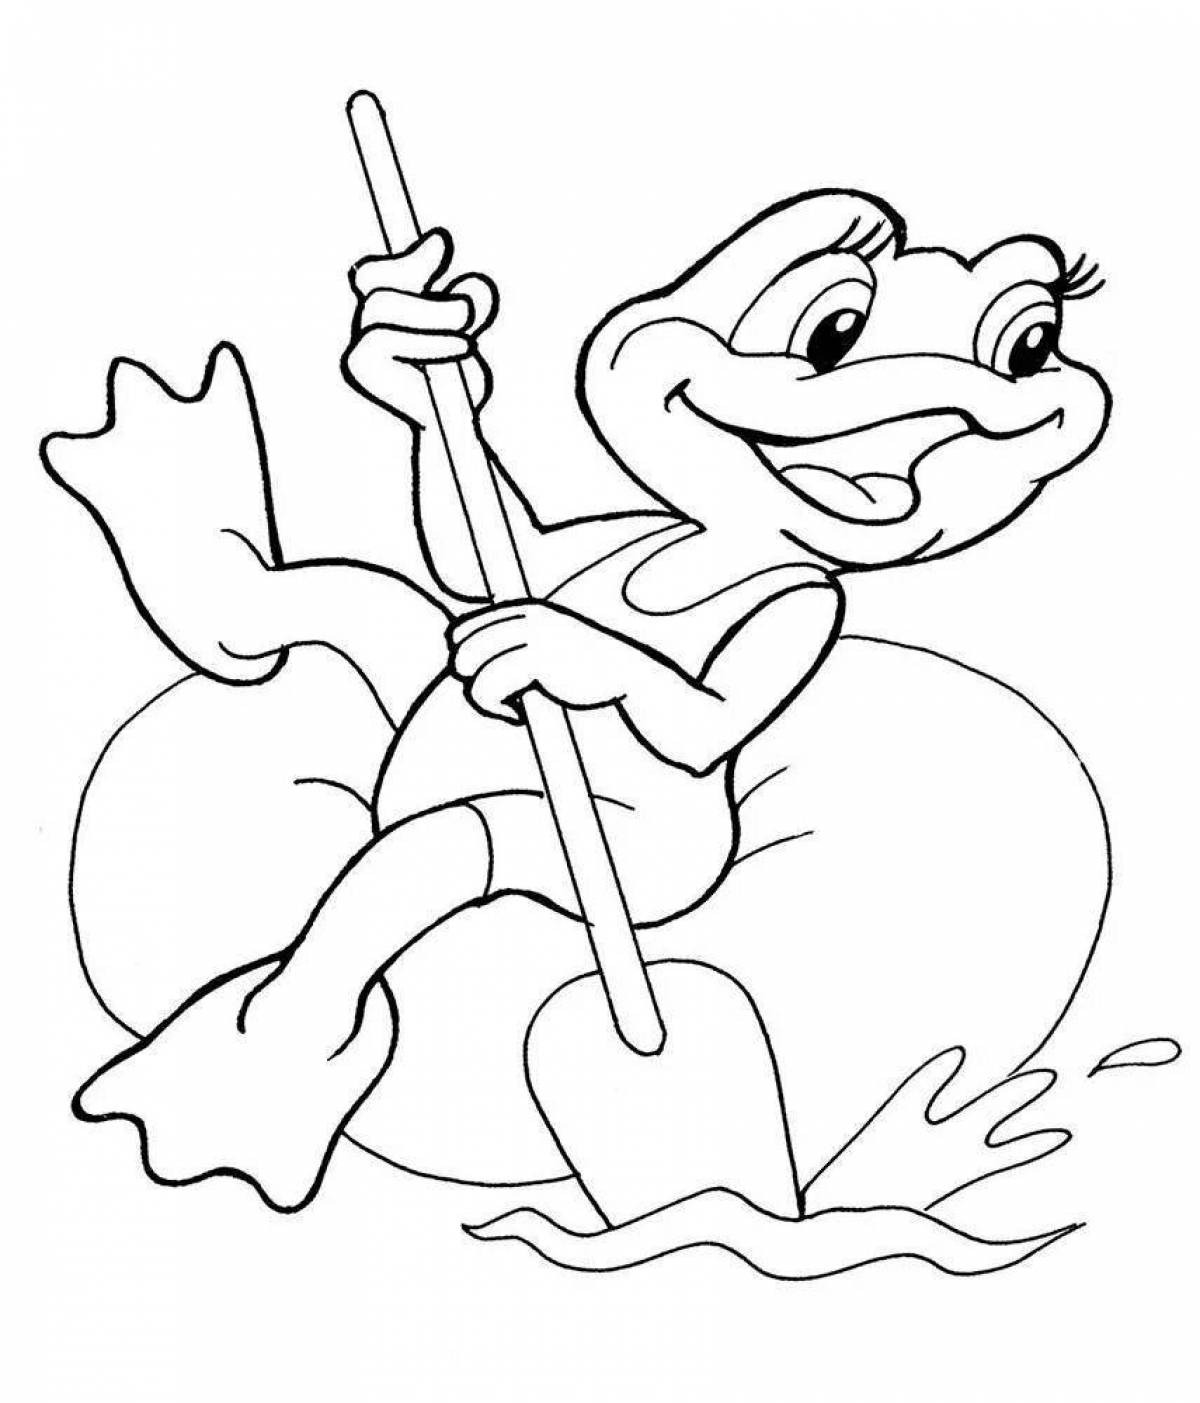 Attractive travel frog coloring book for kids